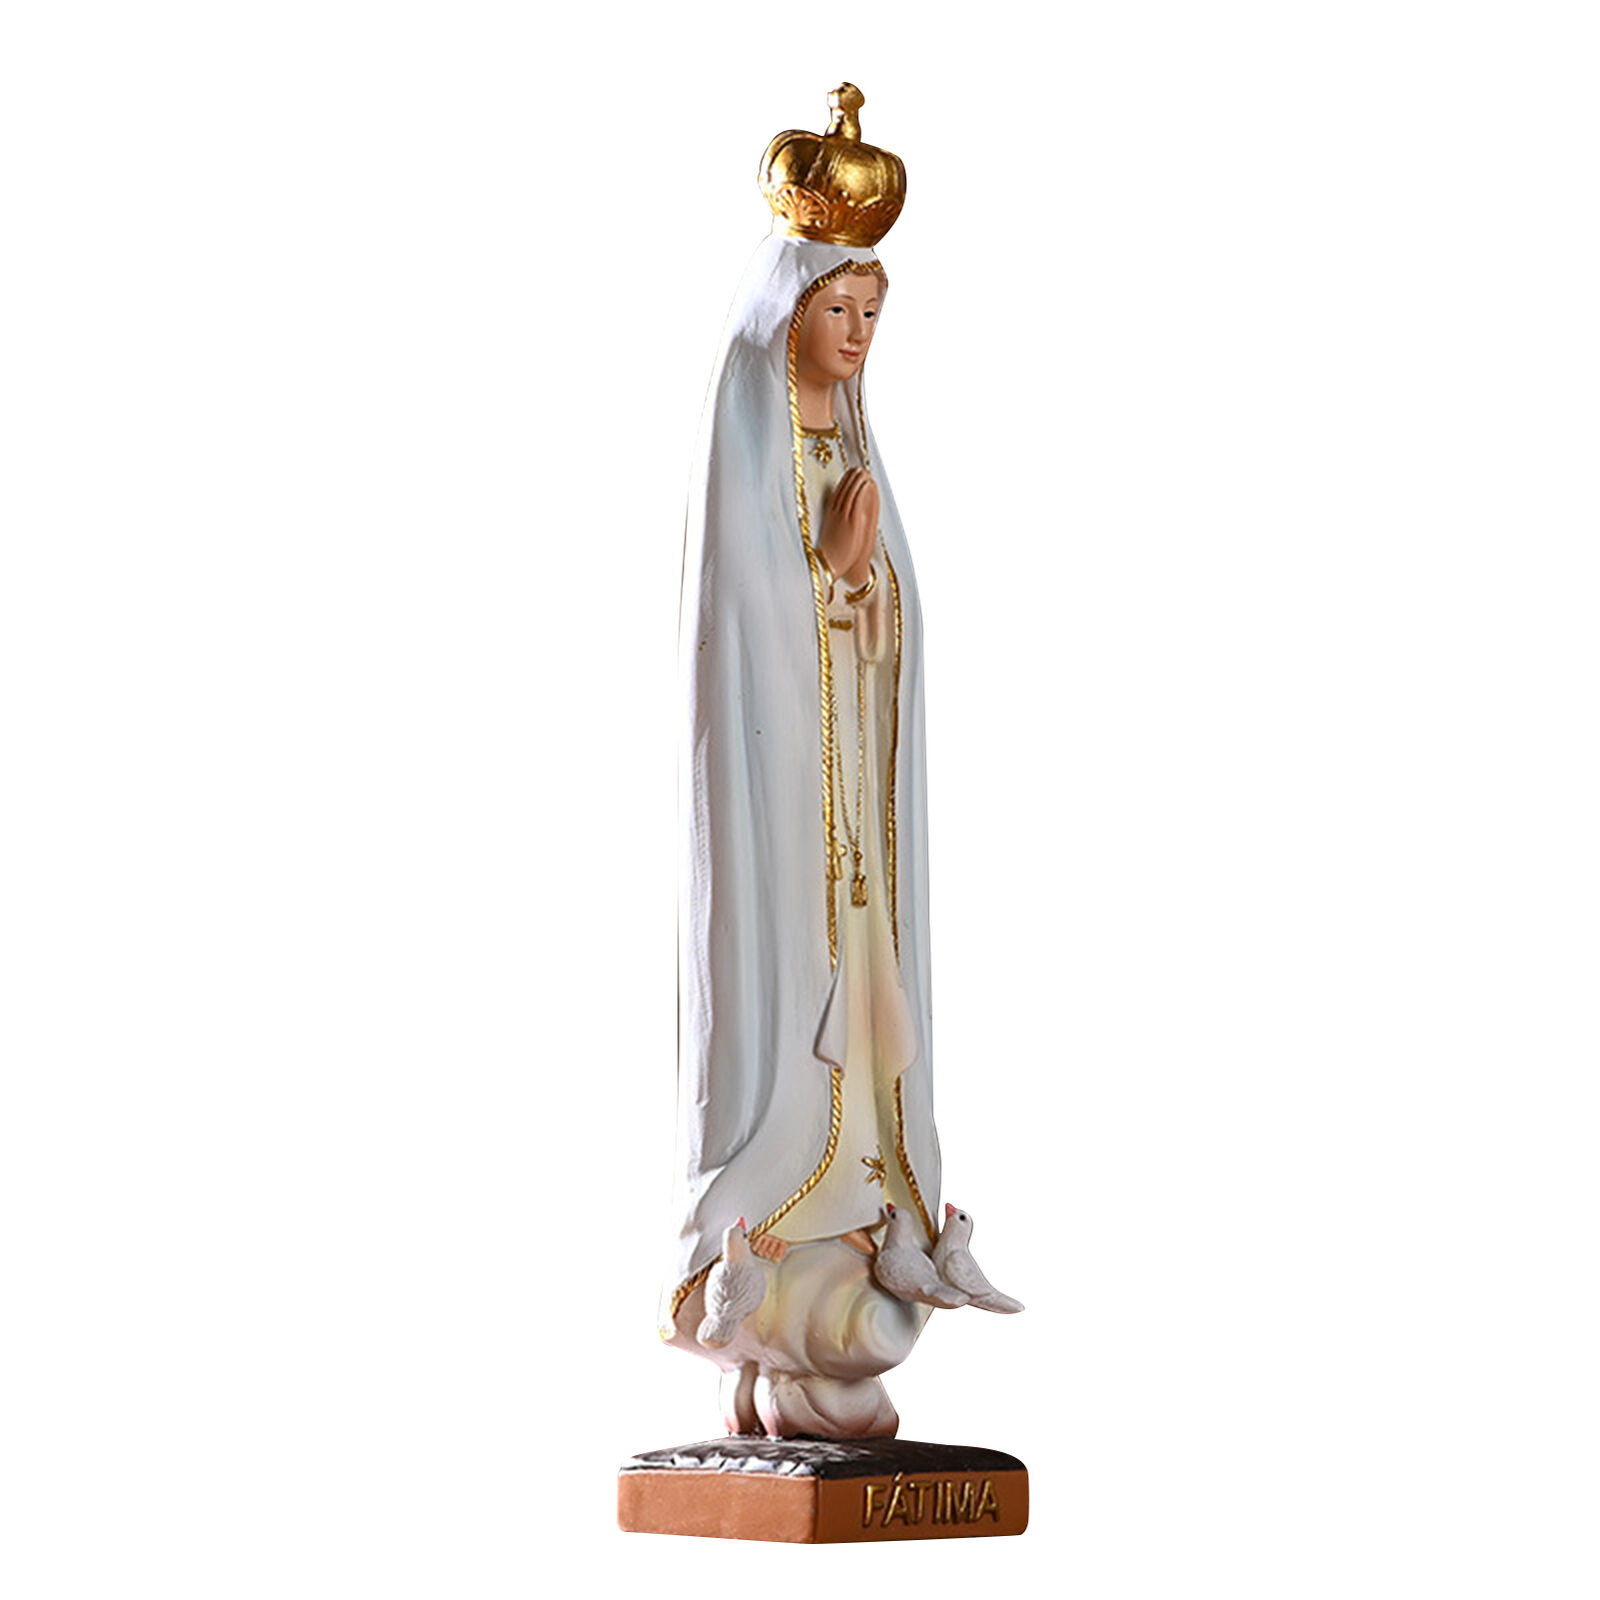 Our Lady Of Fatima Statue Hand-Painted Religious Figurine Virgin Mary Classic